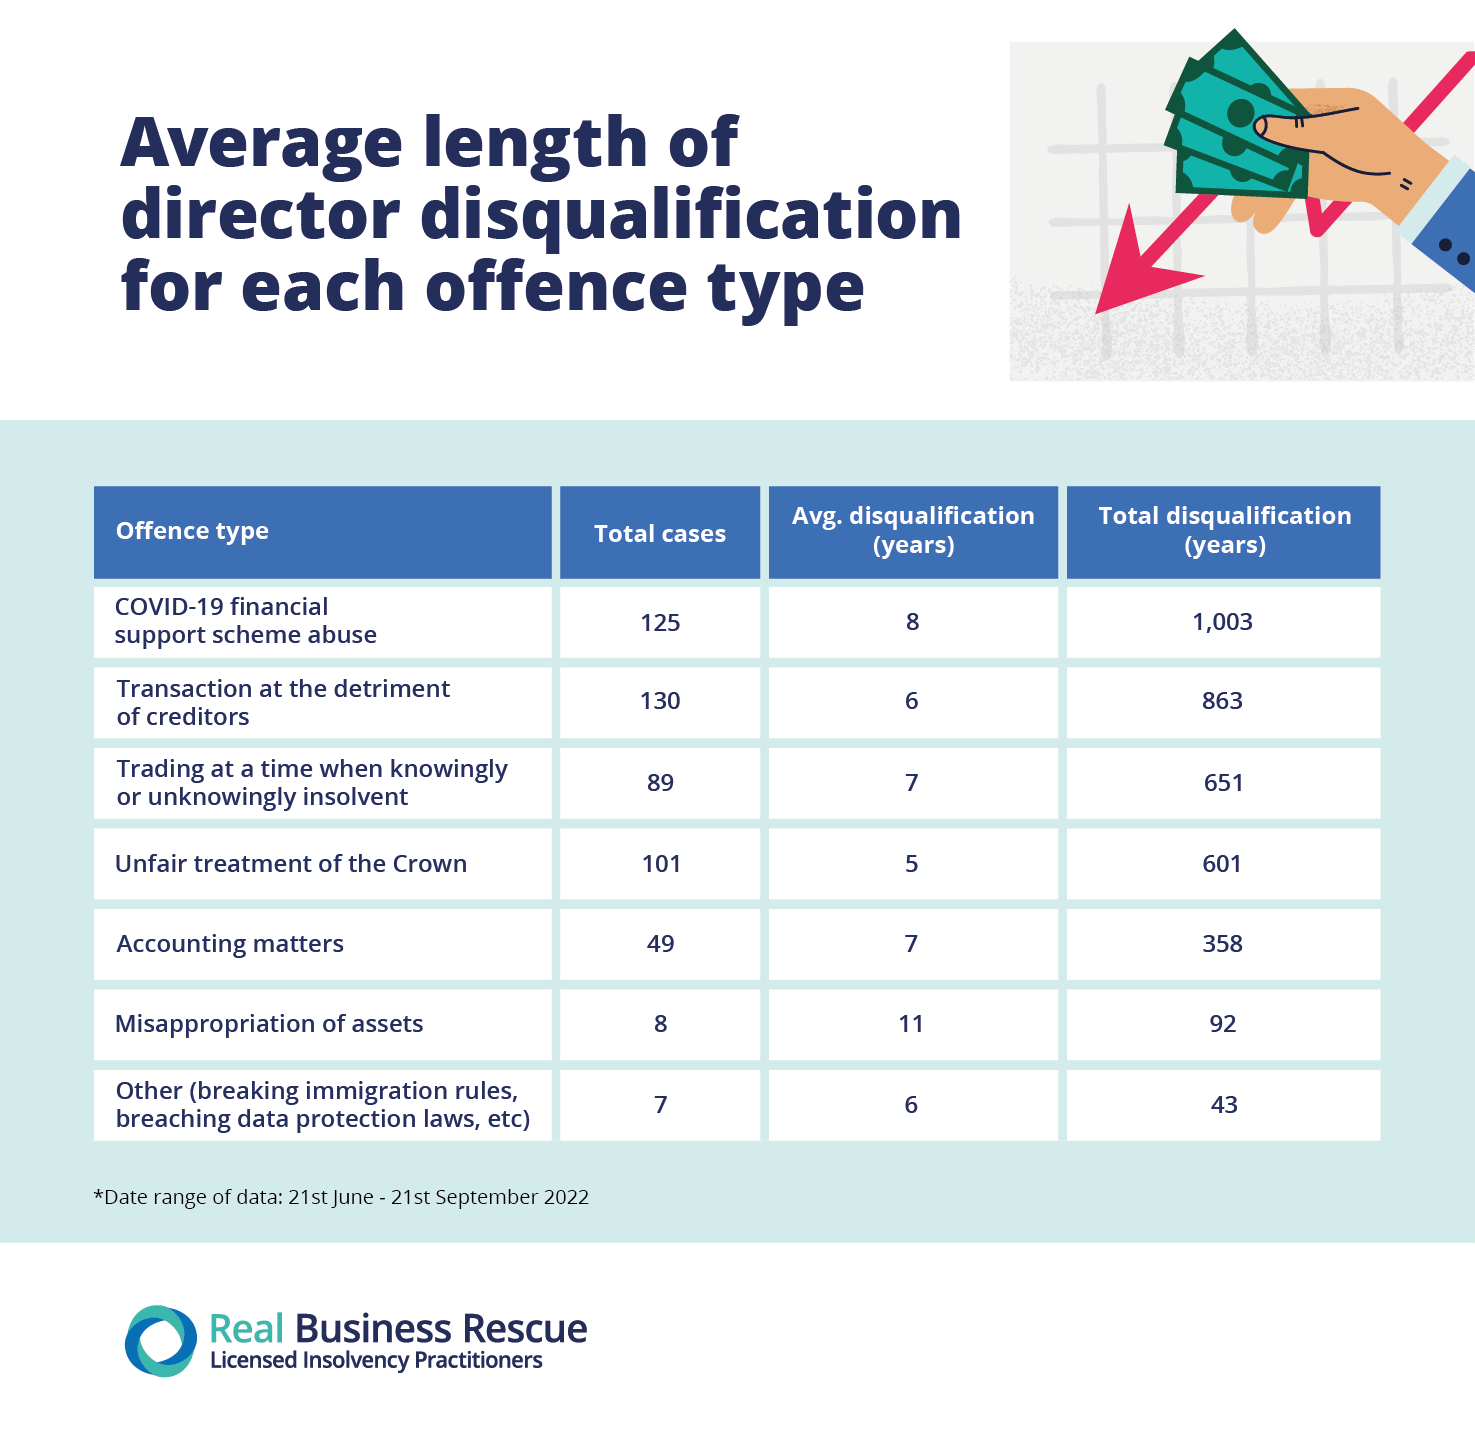 Graphic showing the average length of director disqualifications by offence type.